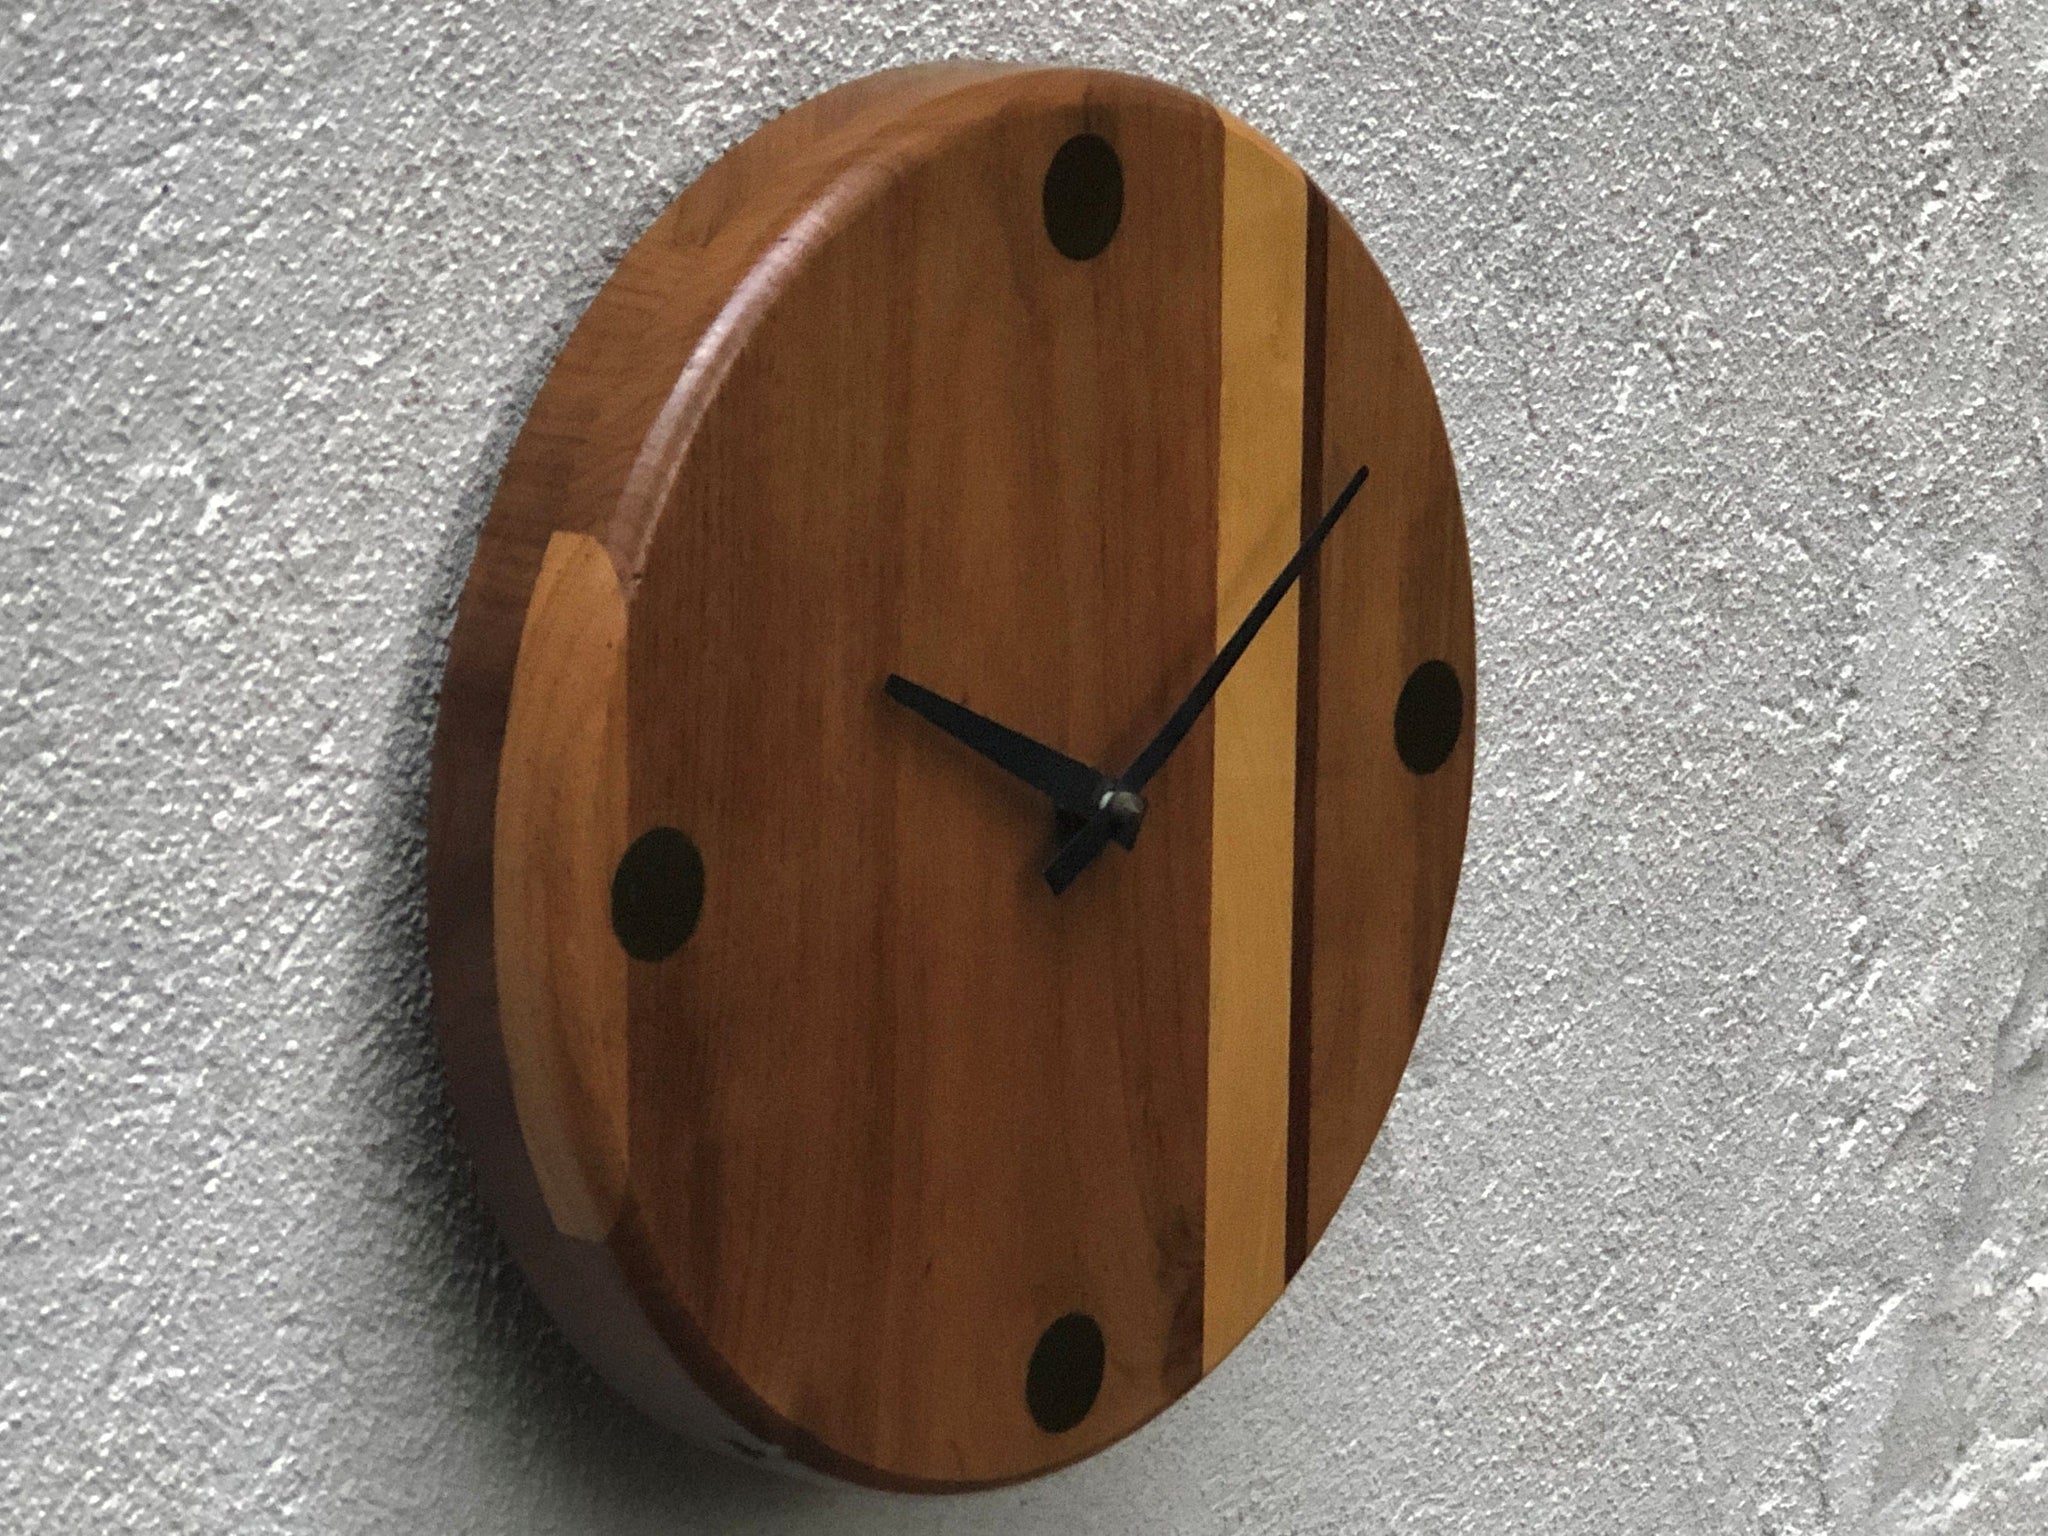 https://www.mikesmcm.com/cdn/shop/files/i-like-mike-s-mid-century-modern-clock-modern-handcrafted-round-solid-wood-wall-clock-inlayed-brass-markers-quiet-quartz-movement-15969042399320_2048x.jpg?v=1690439237